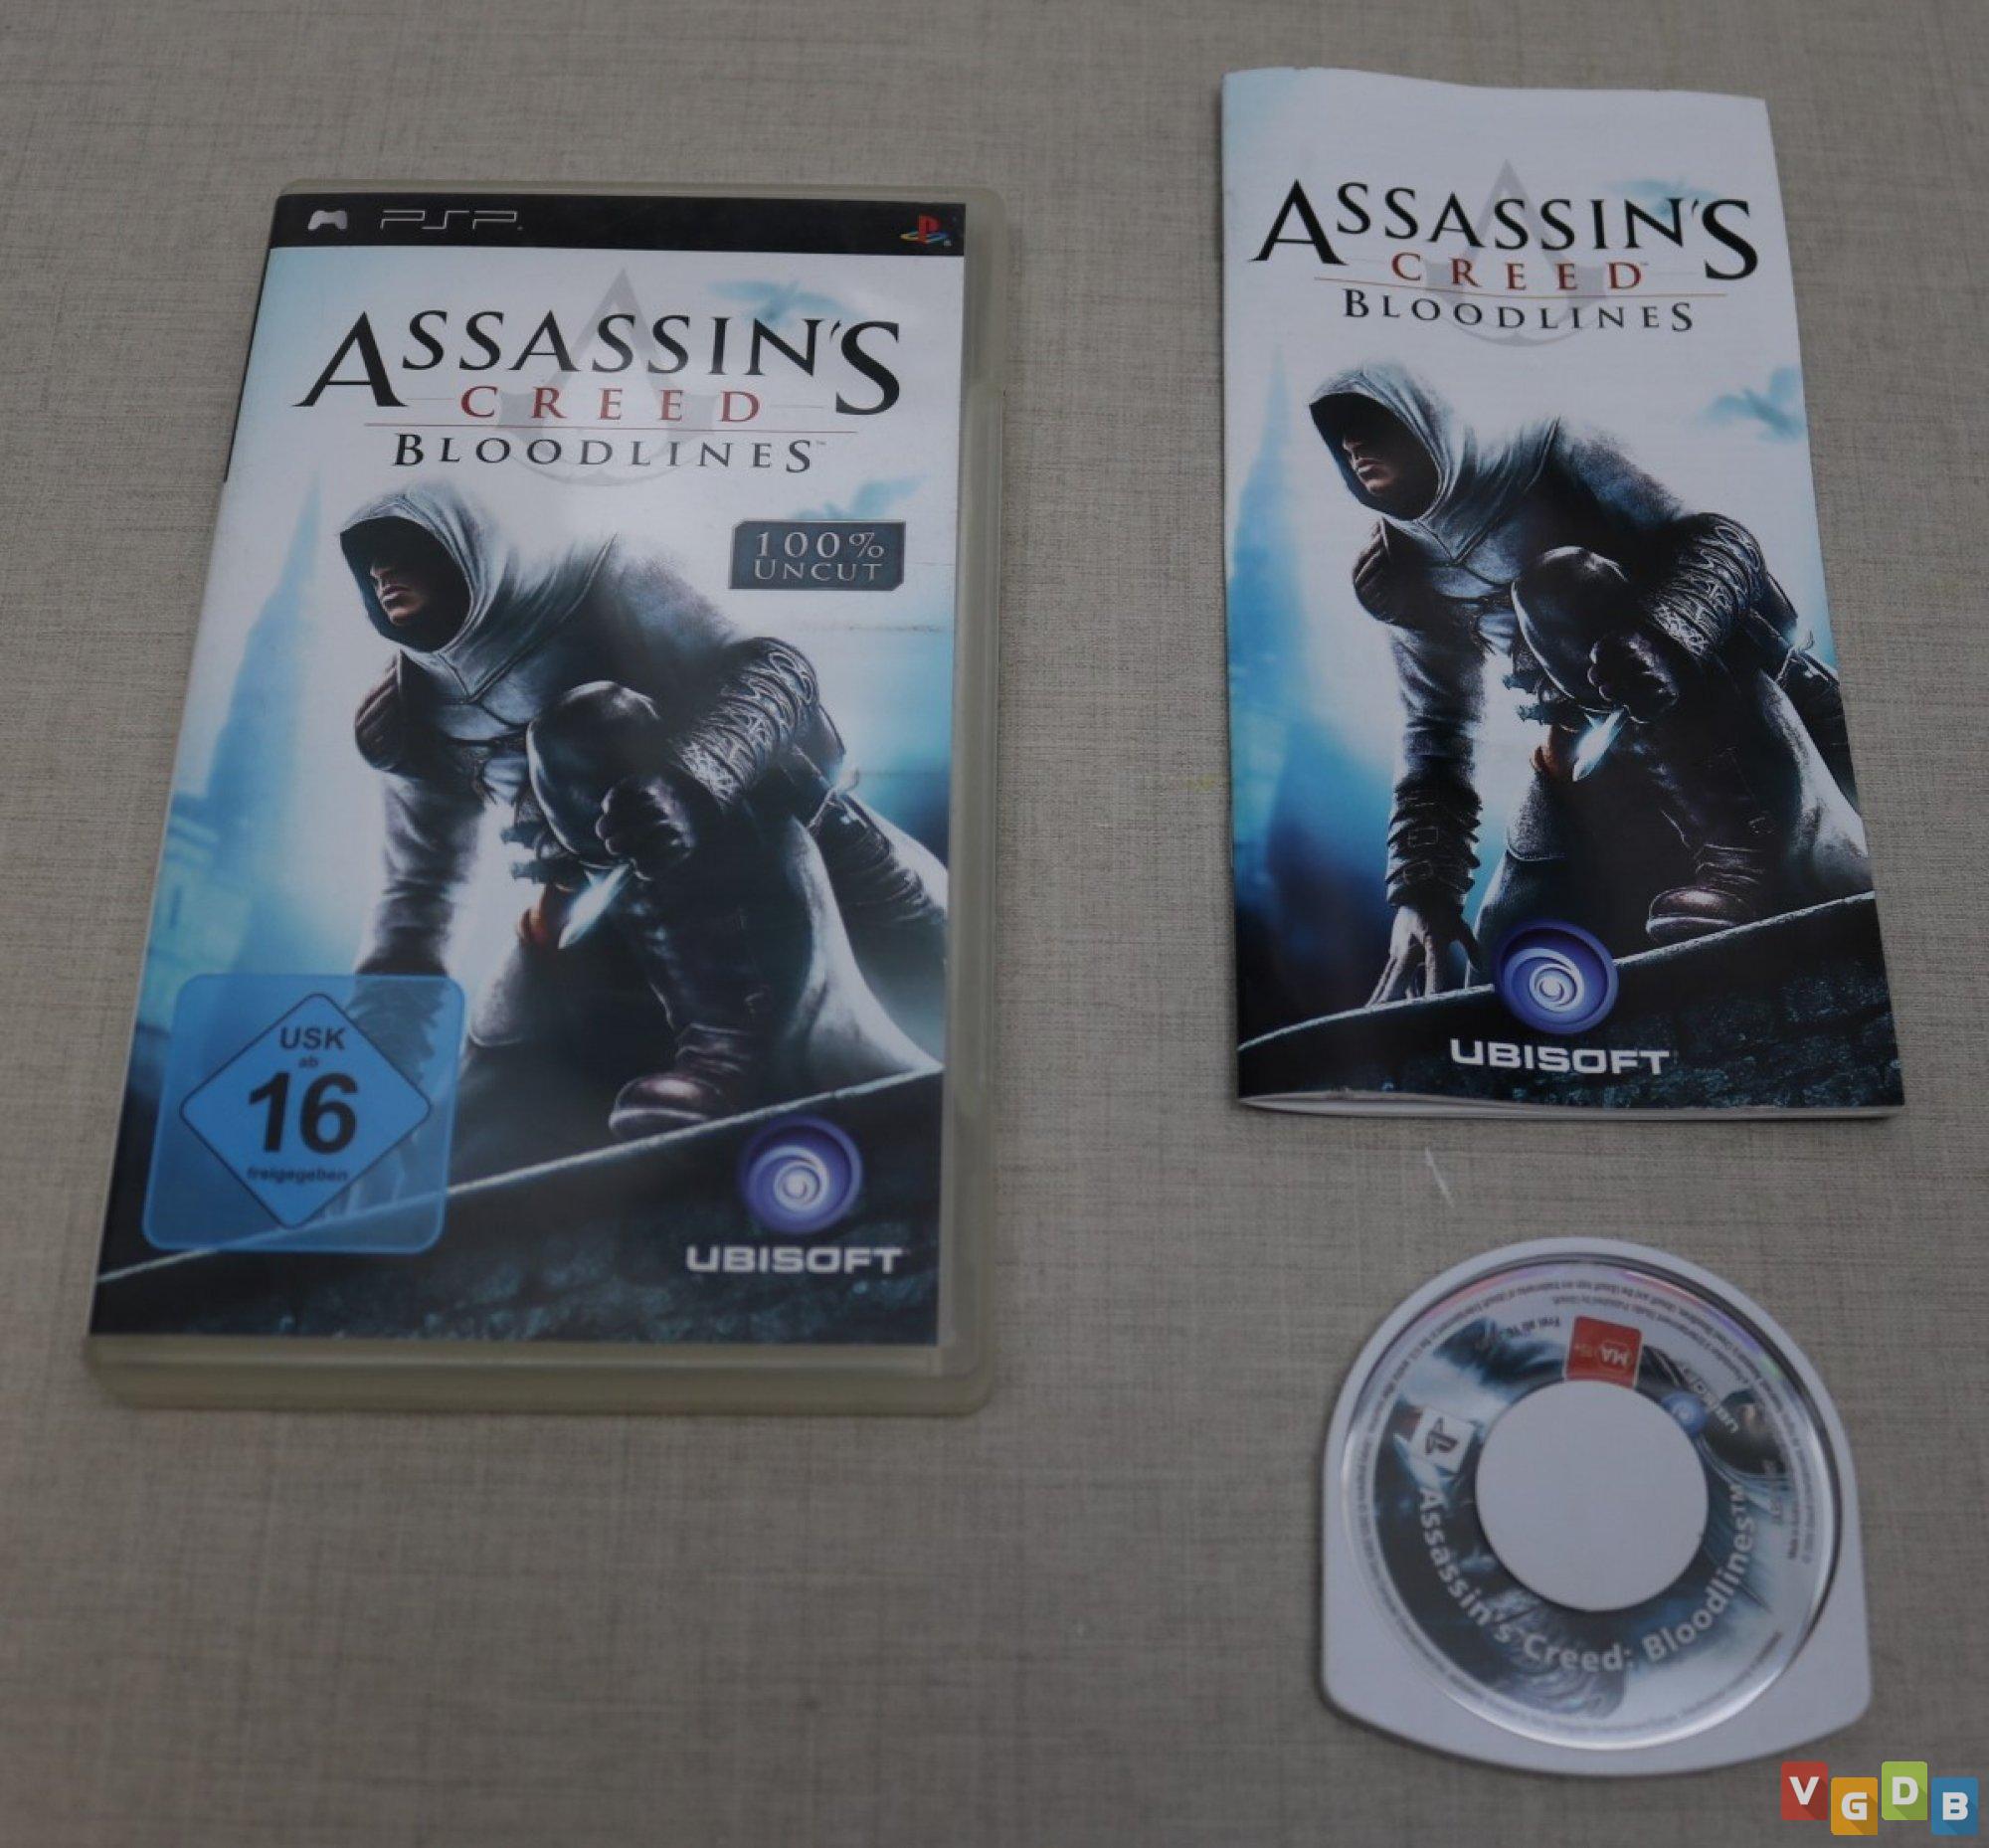 Assassin's Creed - Greatest Hits - VGDB - Vídeo Game Data Base